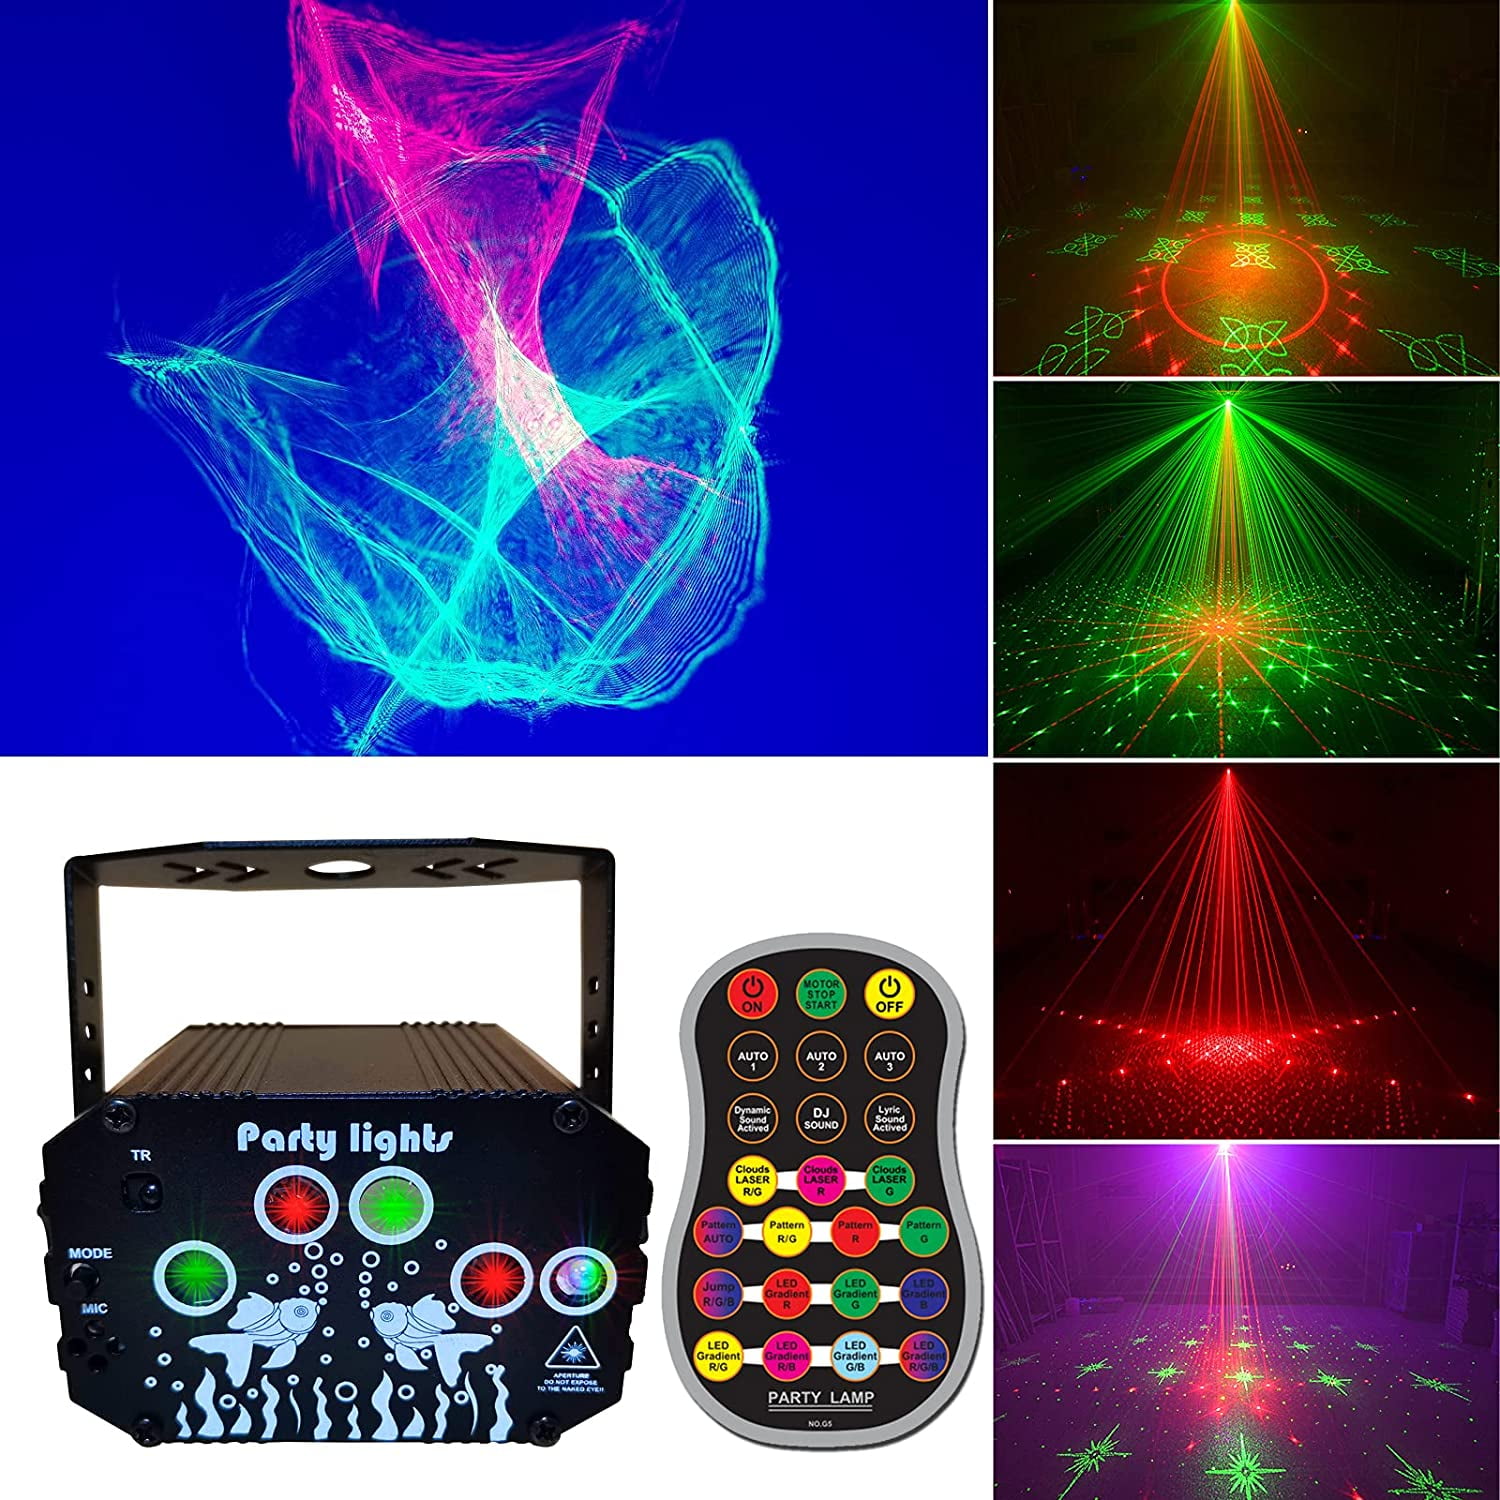 DJ Disco Lights RGB 3 Lens Sound Activated and Remote Control 36 Led Patterns Projector Effects Stage Laser Strobe Lights for Christmas Halloween Party Birthday Wedding Karaoke KTV Decorations Black 